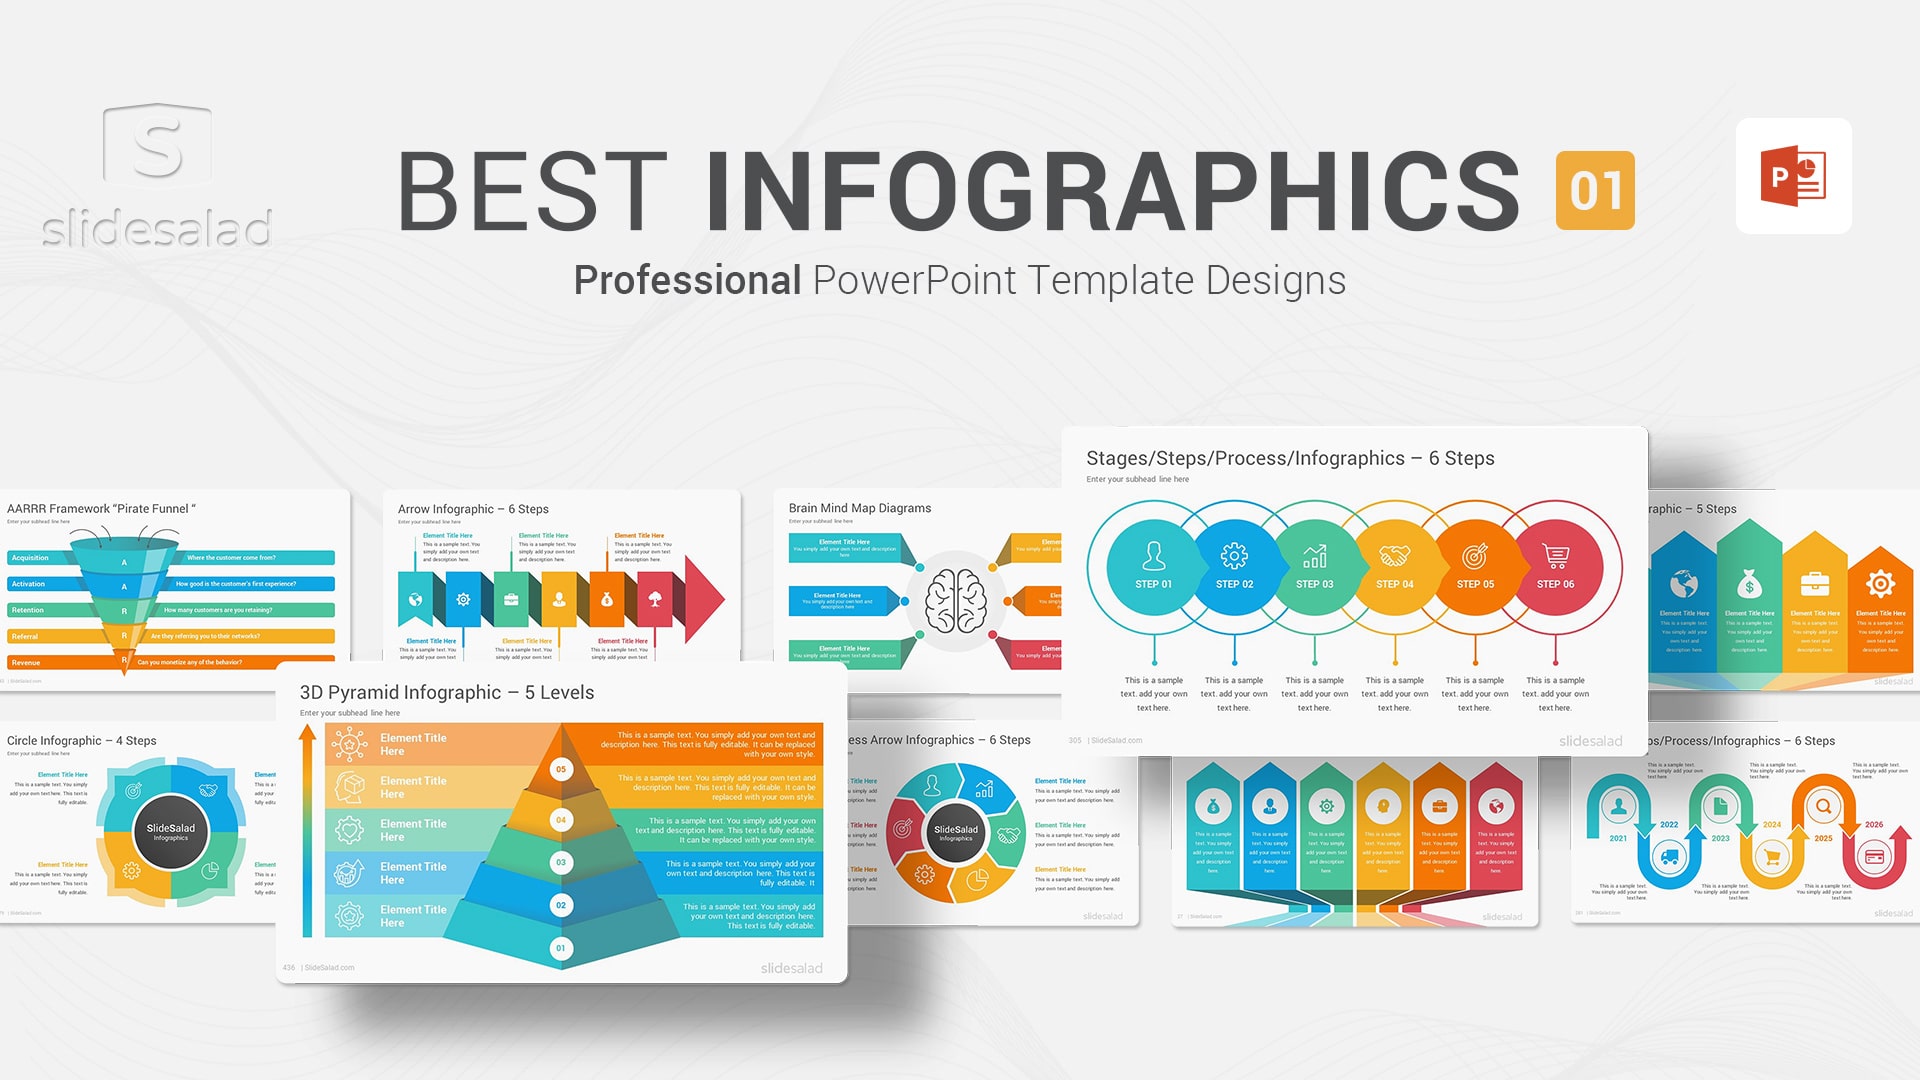 Best Infographics Designs PowerPoint Templates Pack 01 - Diverse Premium Collection of Engaging Infographic Designs